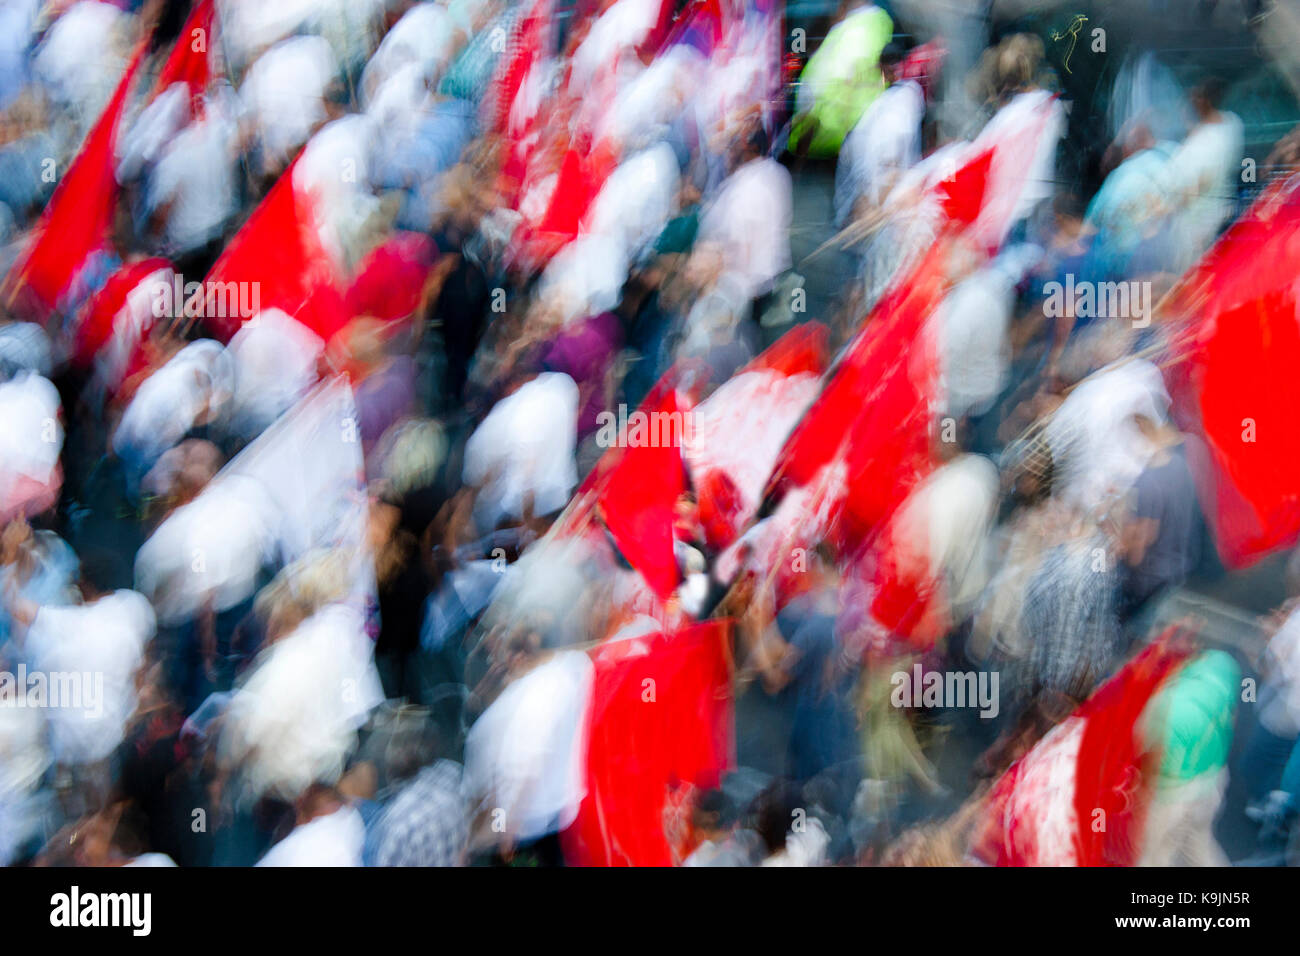 Blurry people in street protest walking with red flags, from above Stock Photo